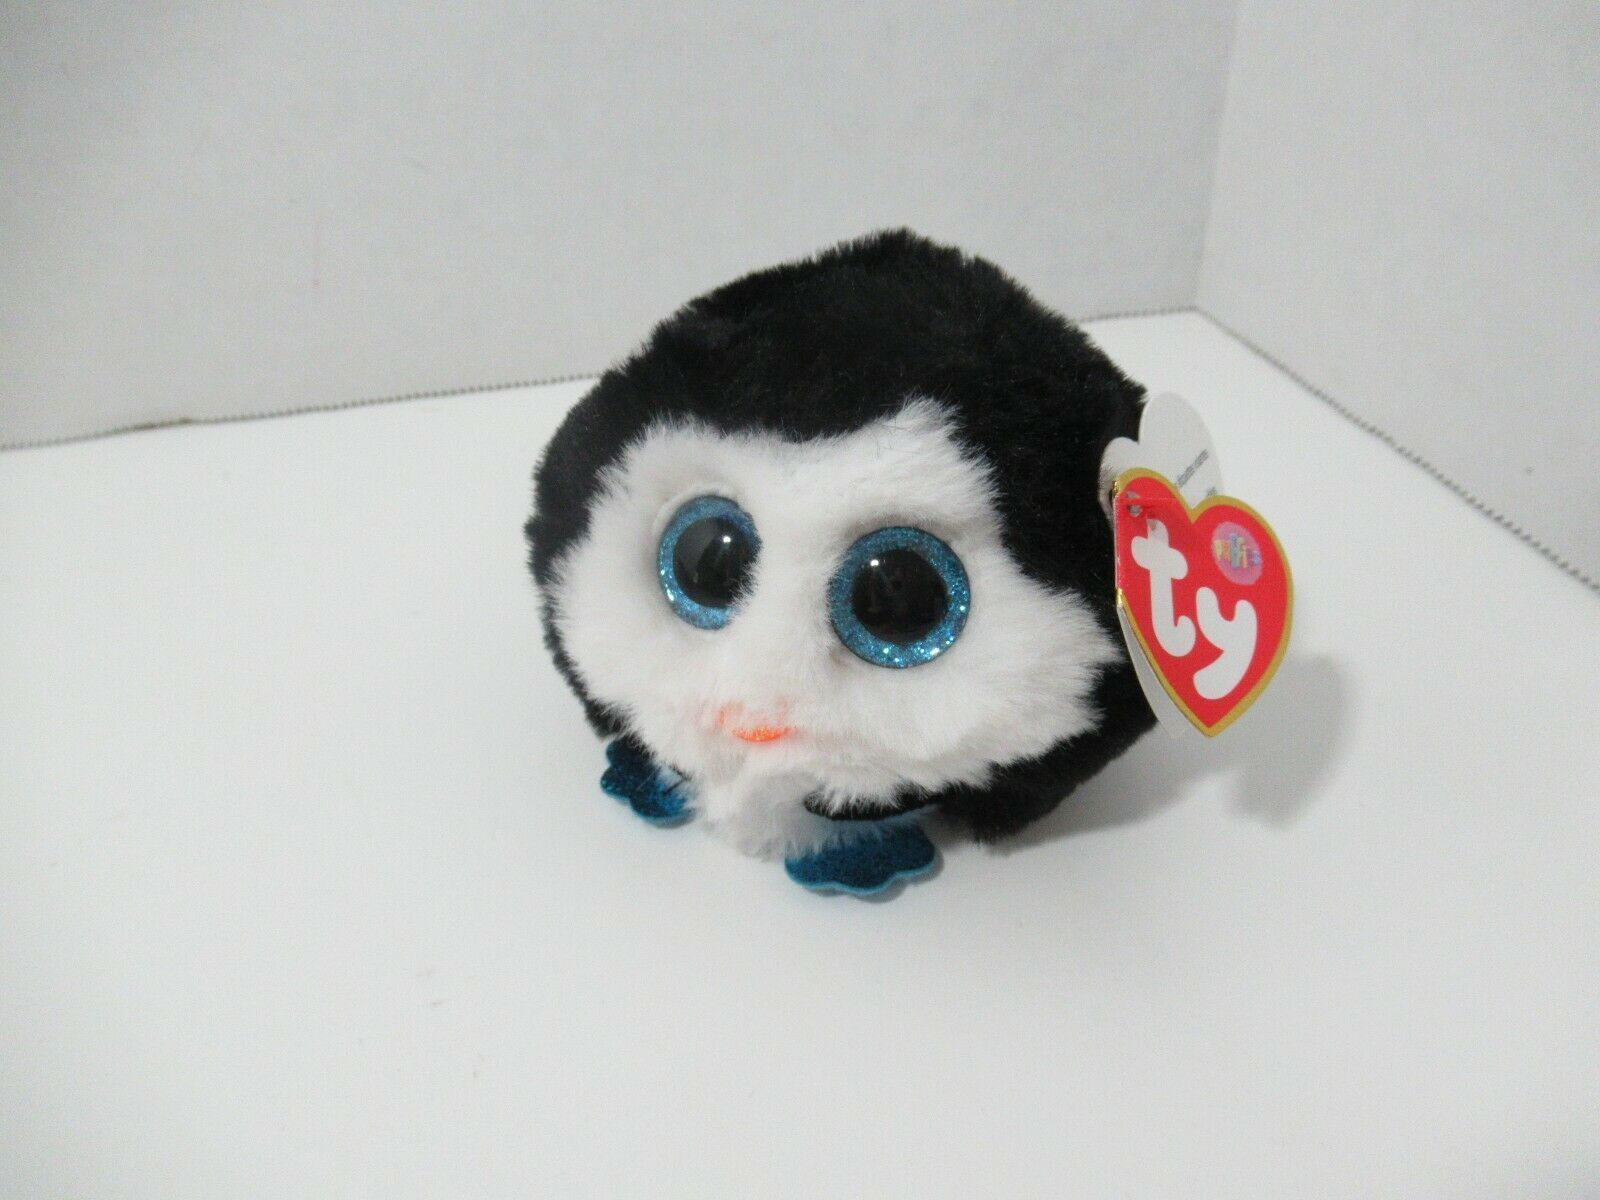 TY Puffies Waddles the Penguin Beanie Babies Brand New with tags 